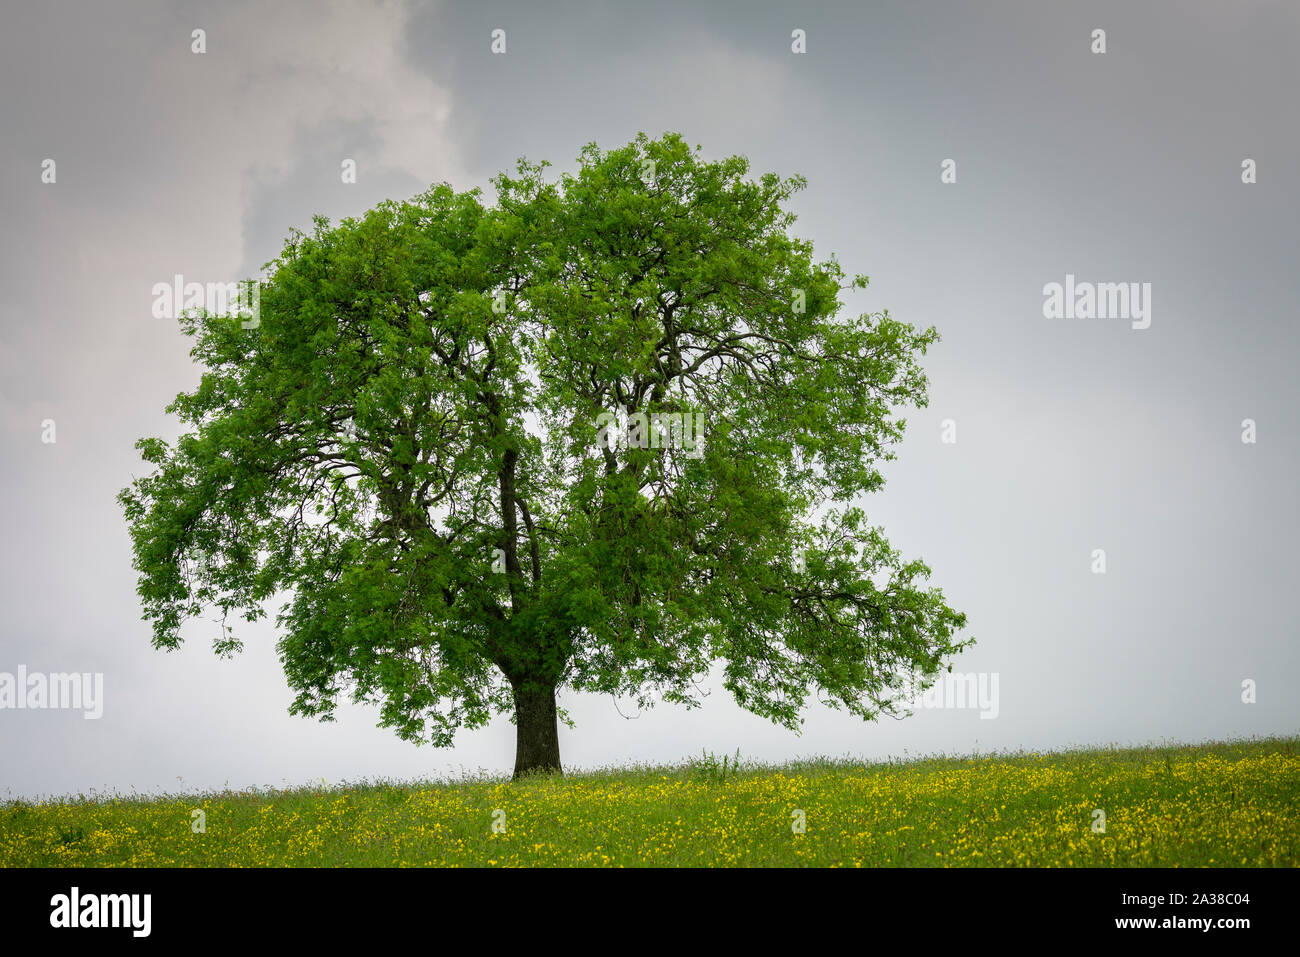 A European Ash tree (Fraxinus excelsior) in a meadow in early spring at Deerleap in in the Mendip Hills, Somerset, England. Stock Photo